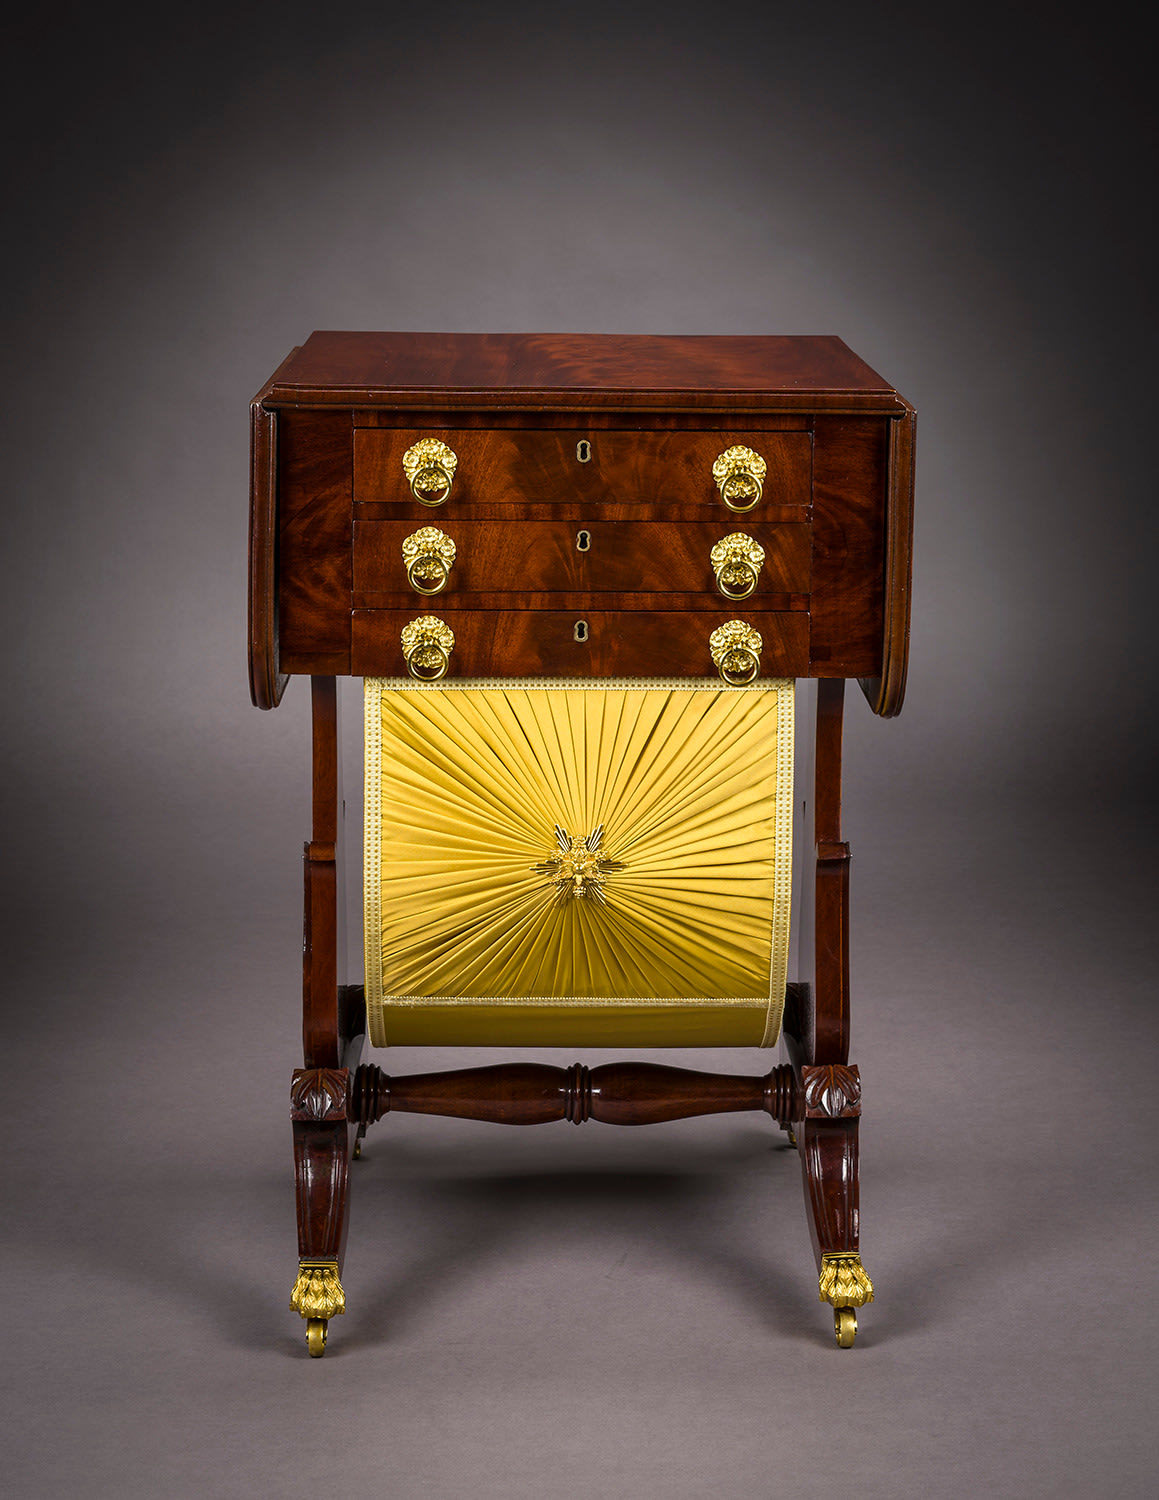 Neo-Classical Drop-Leaf Work Table with Lyre Ends, about 1828&ndash;29. Attributed to Rufus Pierce, Boston. Mahogany, with gilt-brass paw toe-caps and castors, drawer pulls, key-hole escutcheons, baize writing surface, and fabric on workbox, 28 13/16 in. high, 19 1/2 in. wide, 20 1/8 in. deep (at the castors). Frontal view.